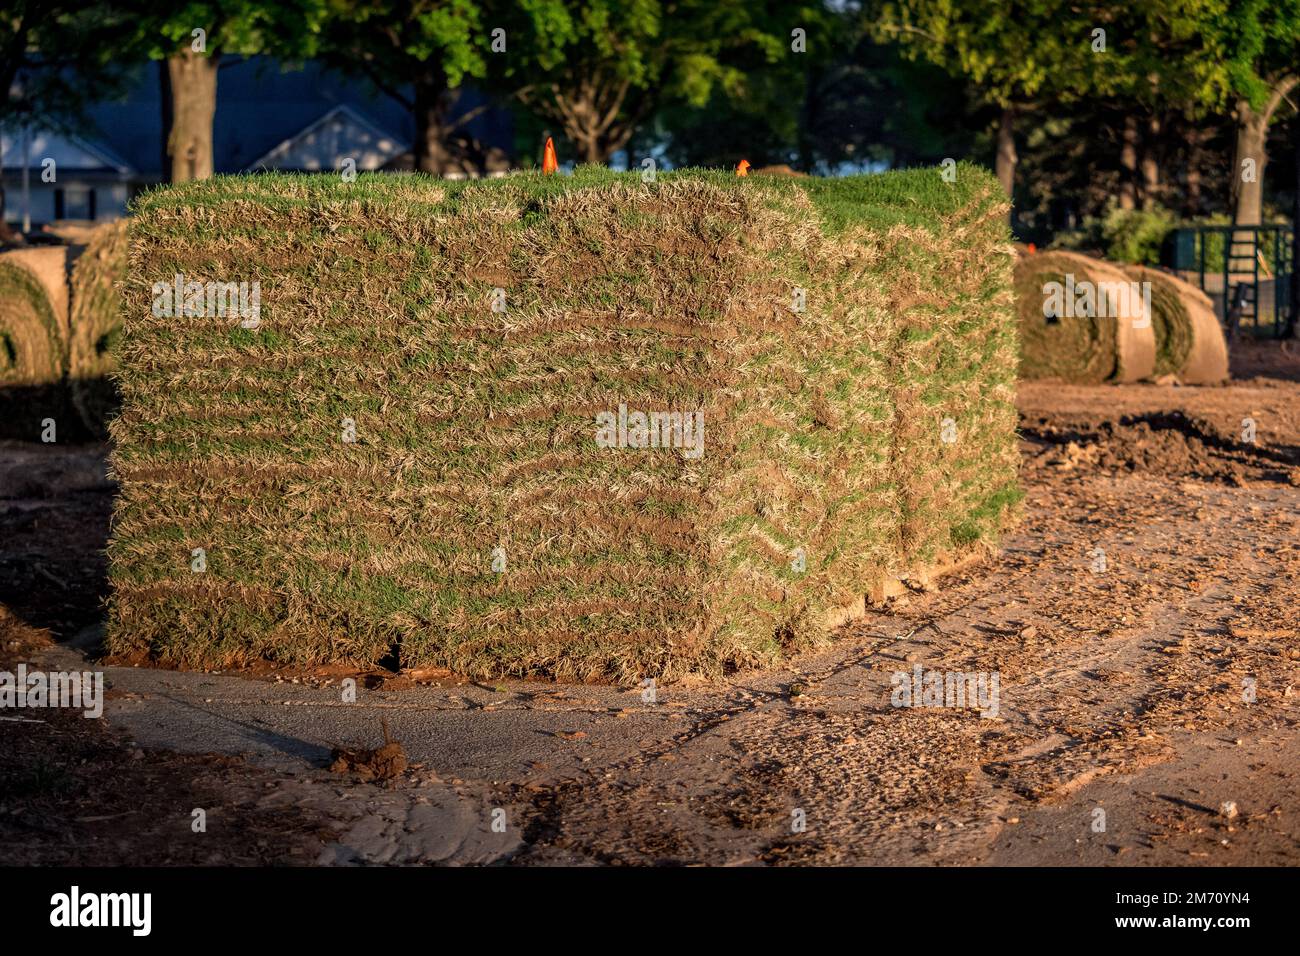 Fresh sod grass squares stacked on pallet ready for landscape installation. Stock Photo